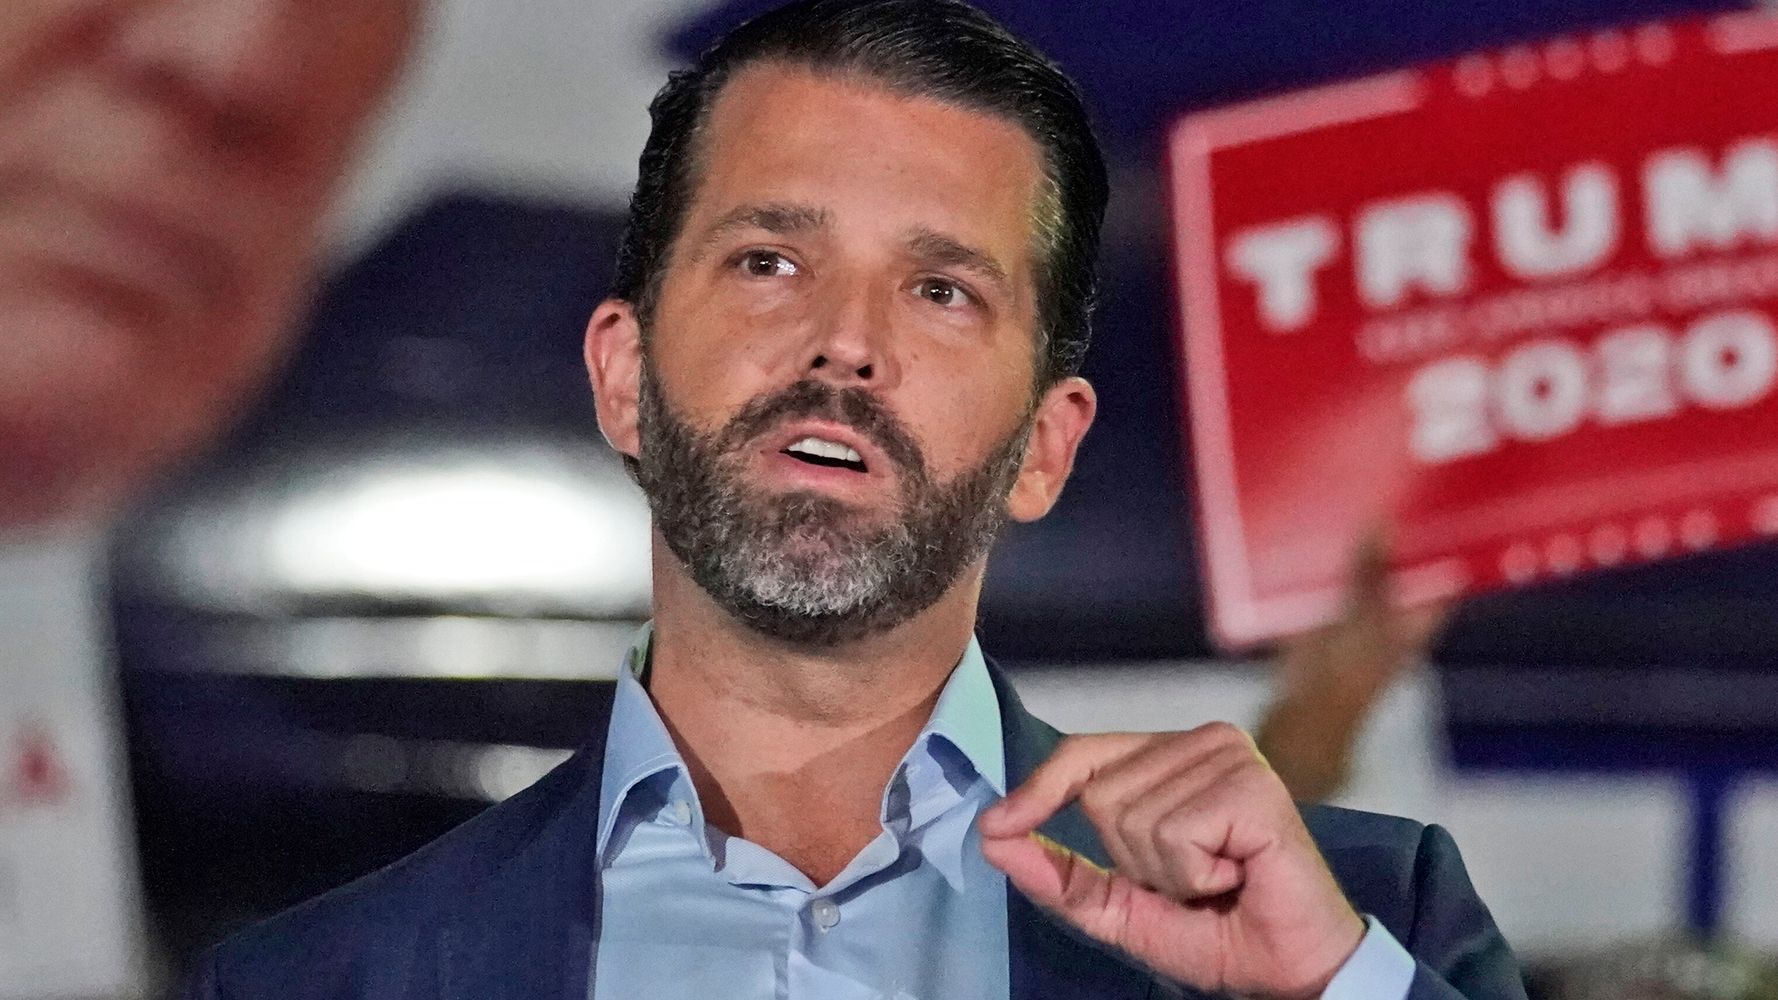 Self-Confessed Troll Donald Trump Jr. Shares Fake Video Of His Dad Beating Up Biden